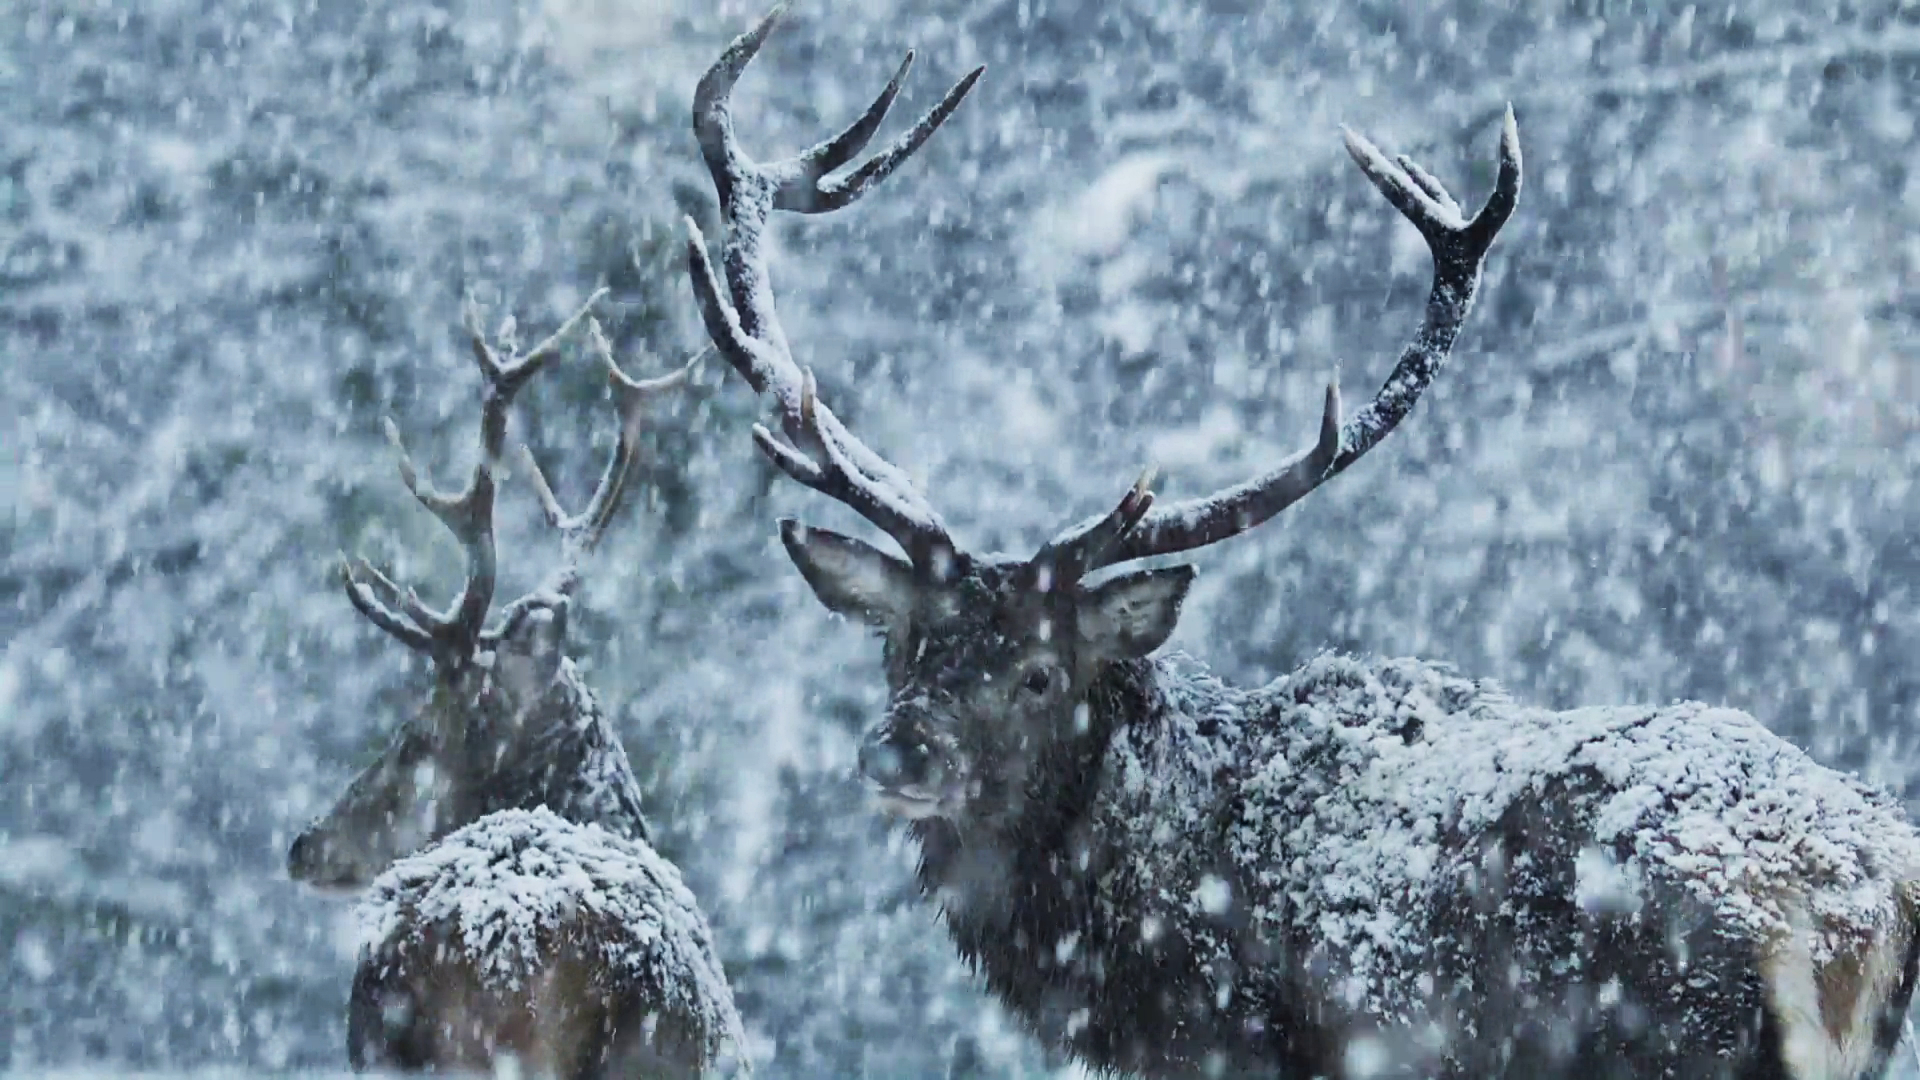 Stags amid snowy scenes in the north of Scotland.